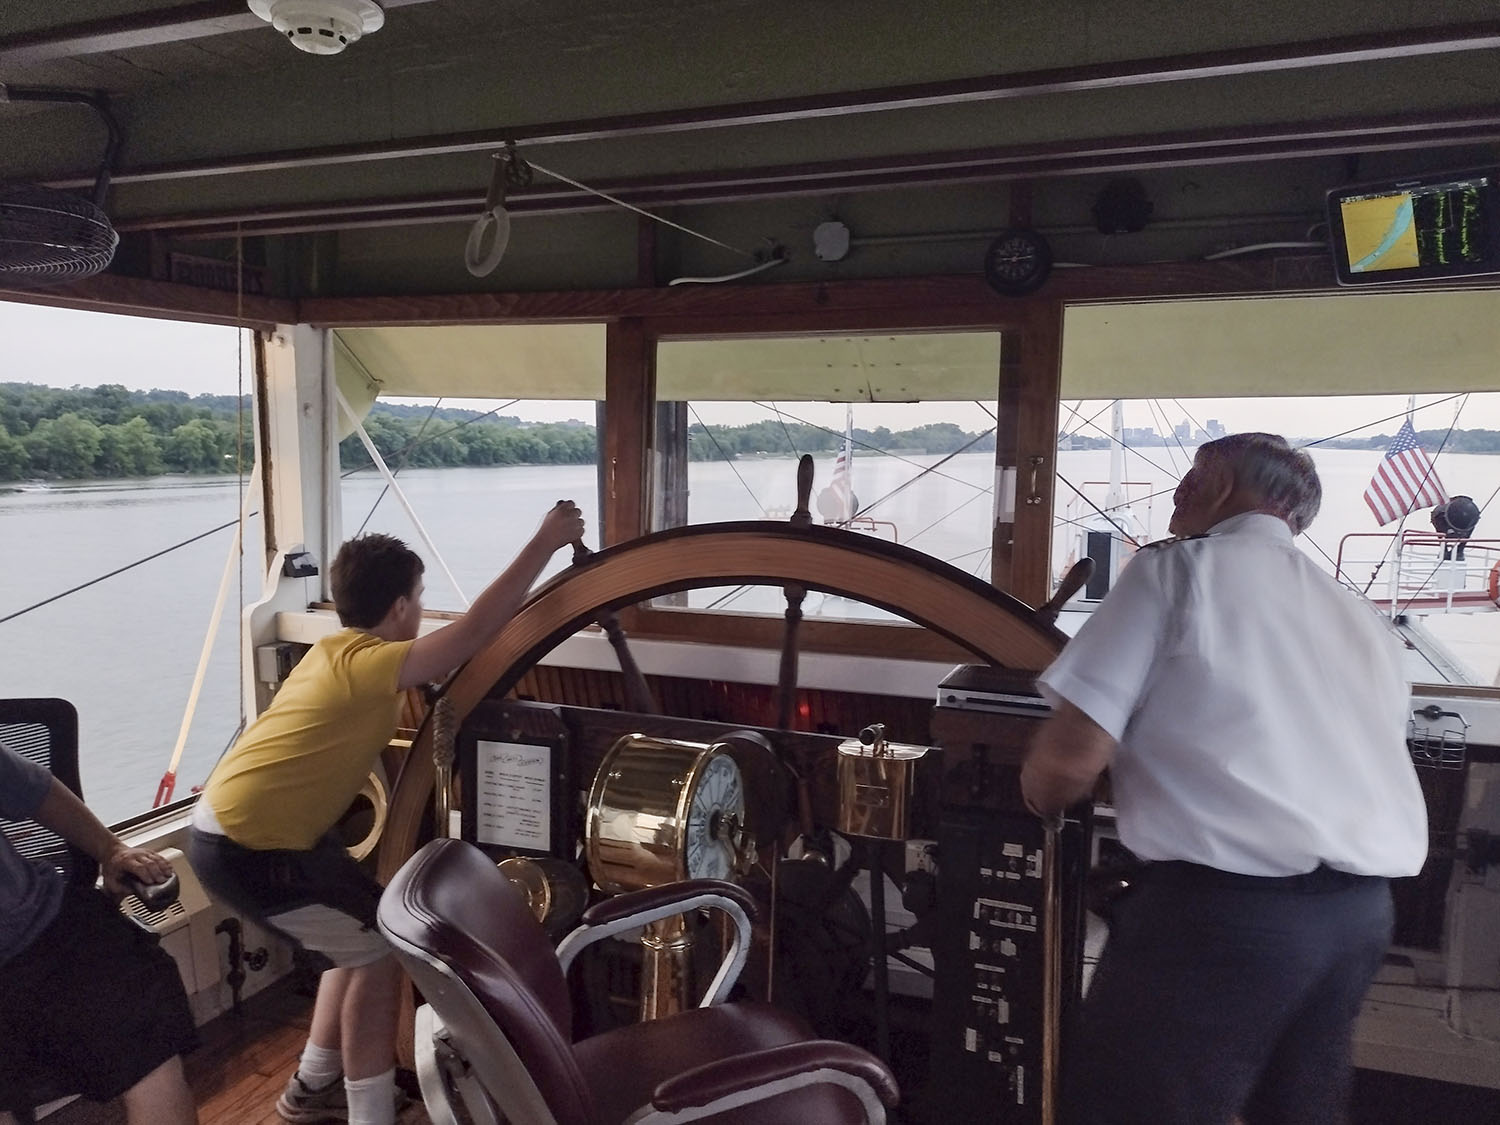 Drew Byrne, 12, strains as he turns the Belle of Louisville’s original wooden wheel while Capt. Mike Fitzgerald keeps a steady hand on the lever. (Photo by Shelley Byrne)